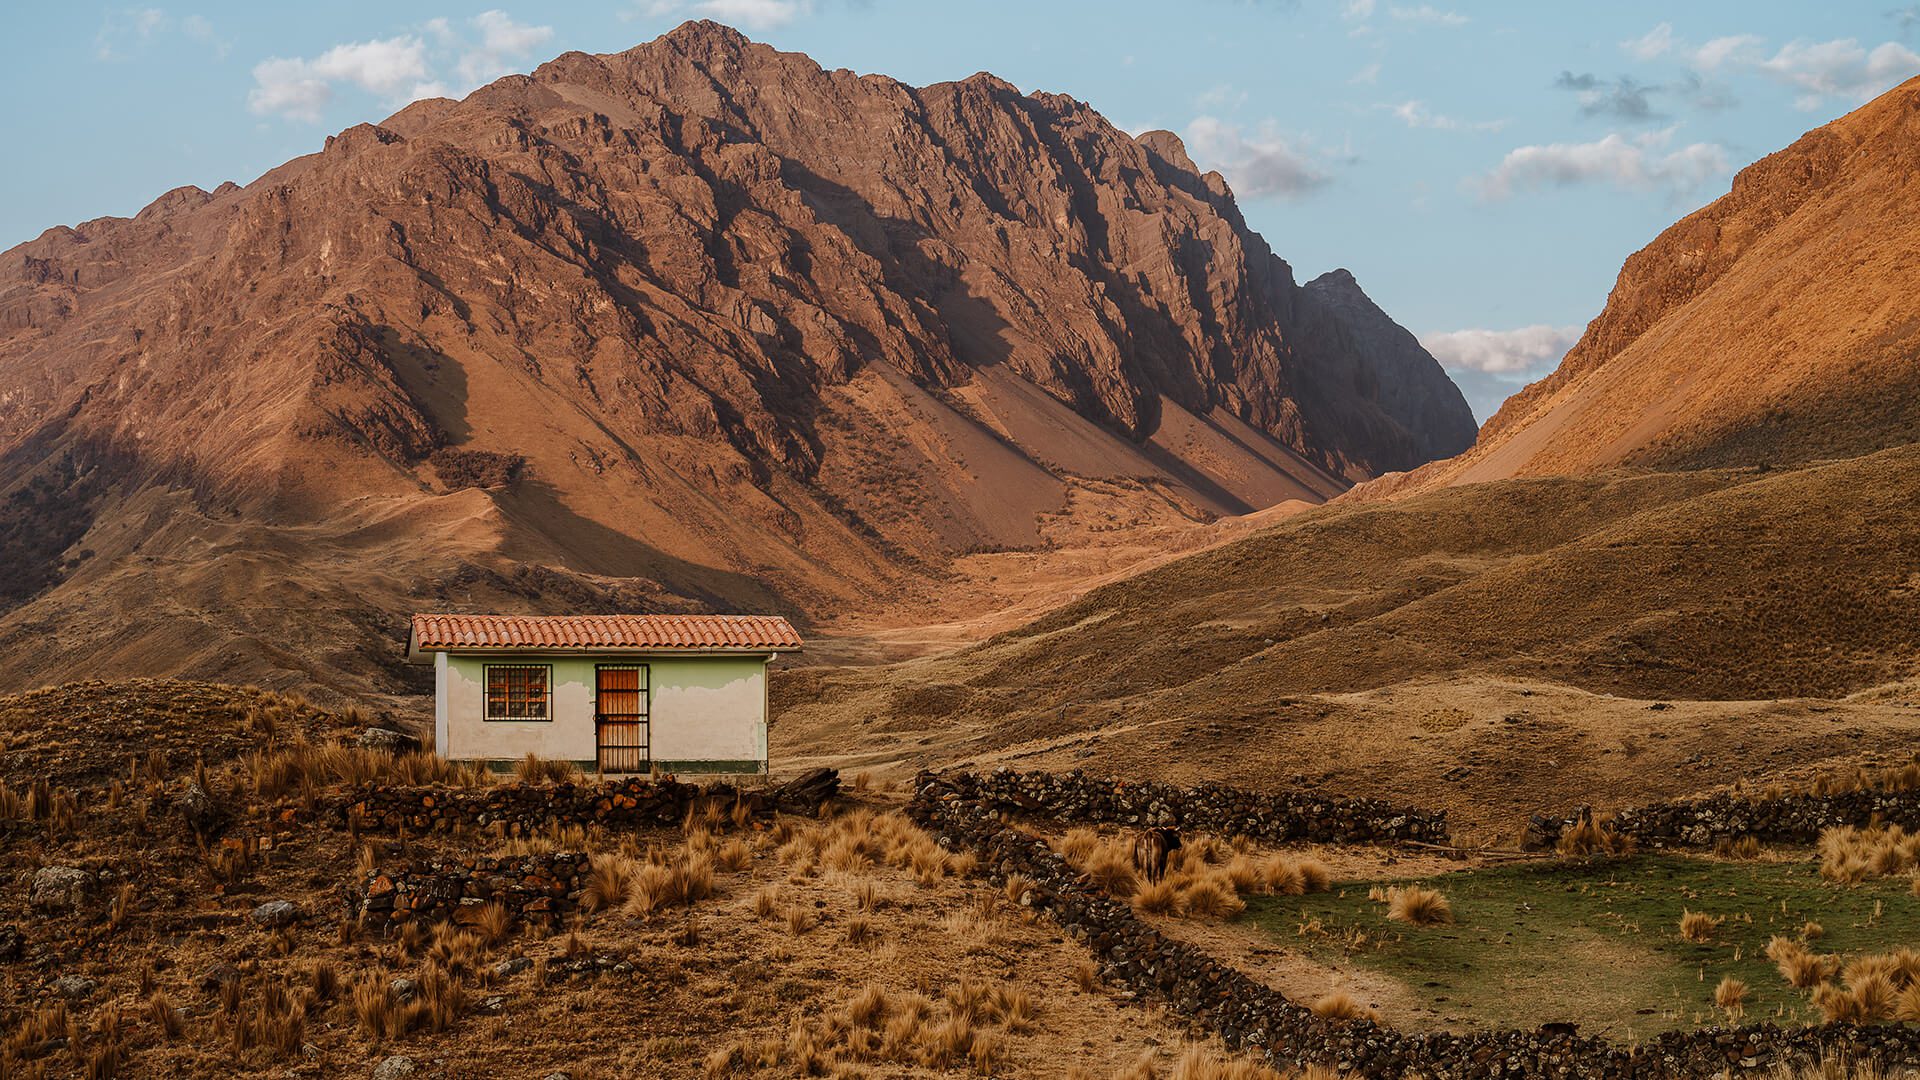 Tiny house in the middle of nowhere | Llama Trek Olleros to Chavin with RESPONSible Travel Peru | Photo by Bjorn Snelders